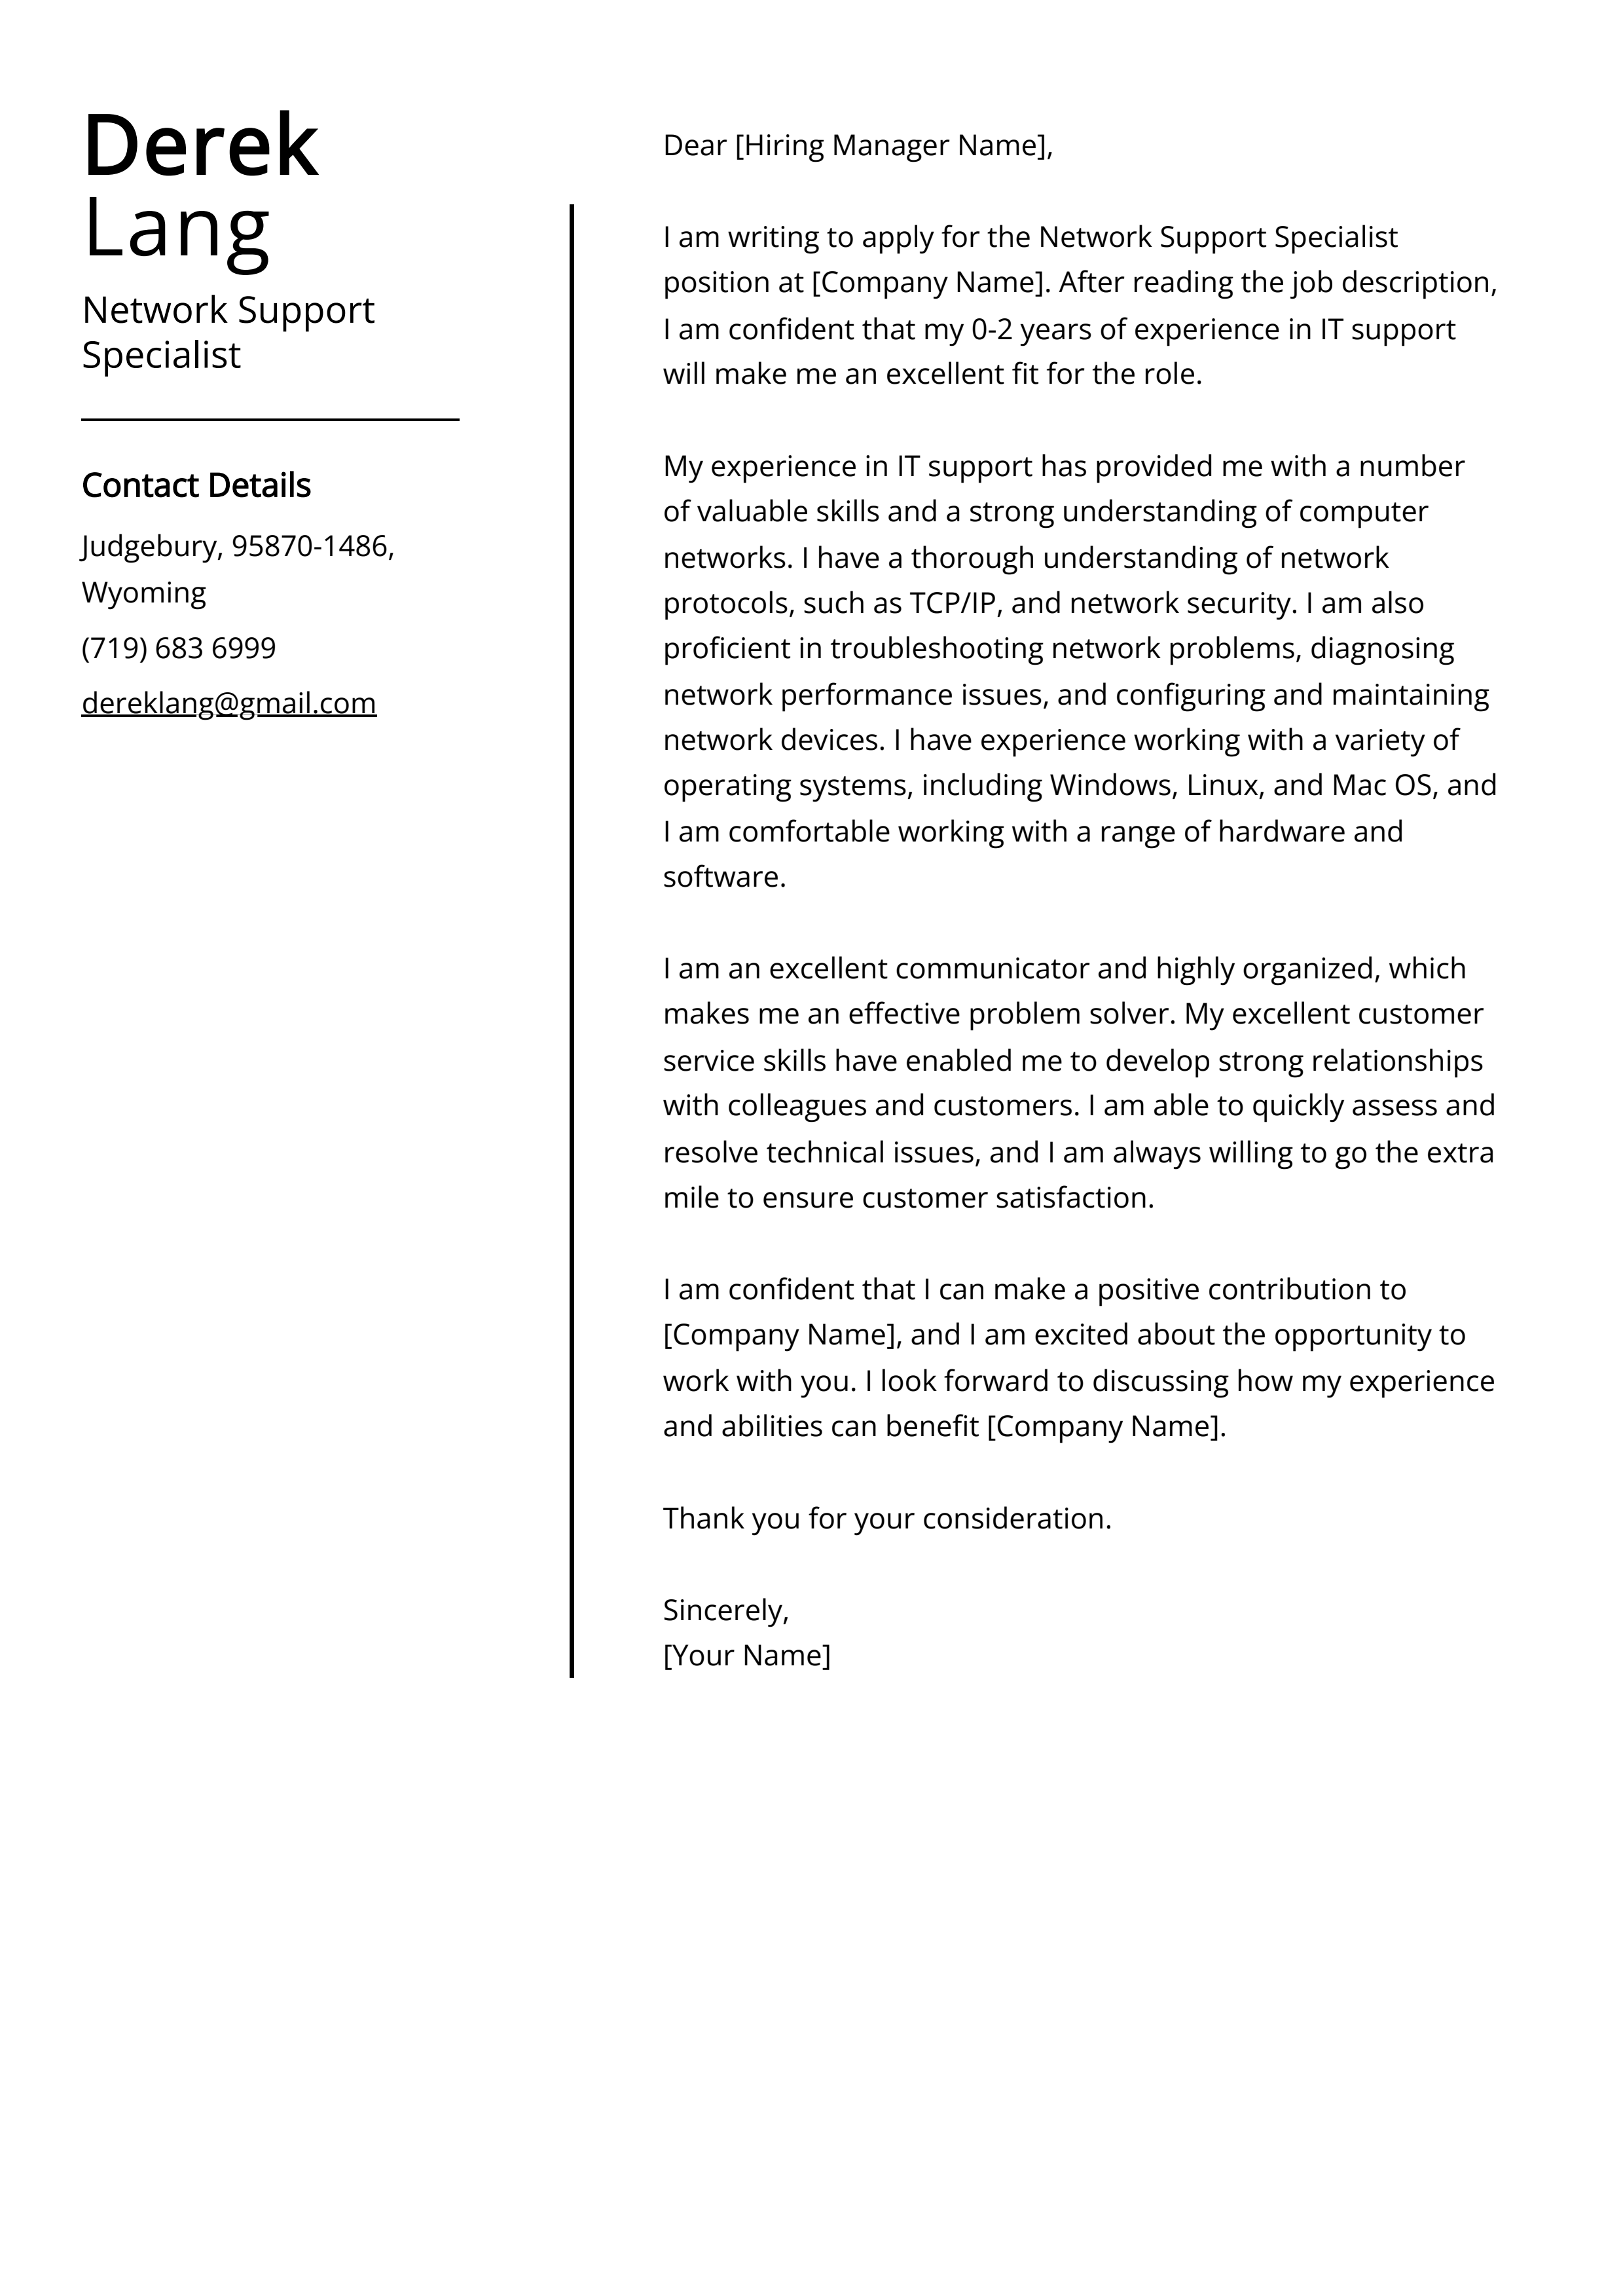 Network Support Specialist Cover Letter Example